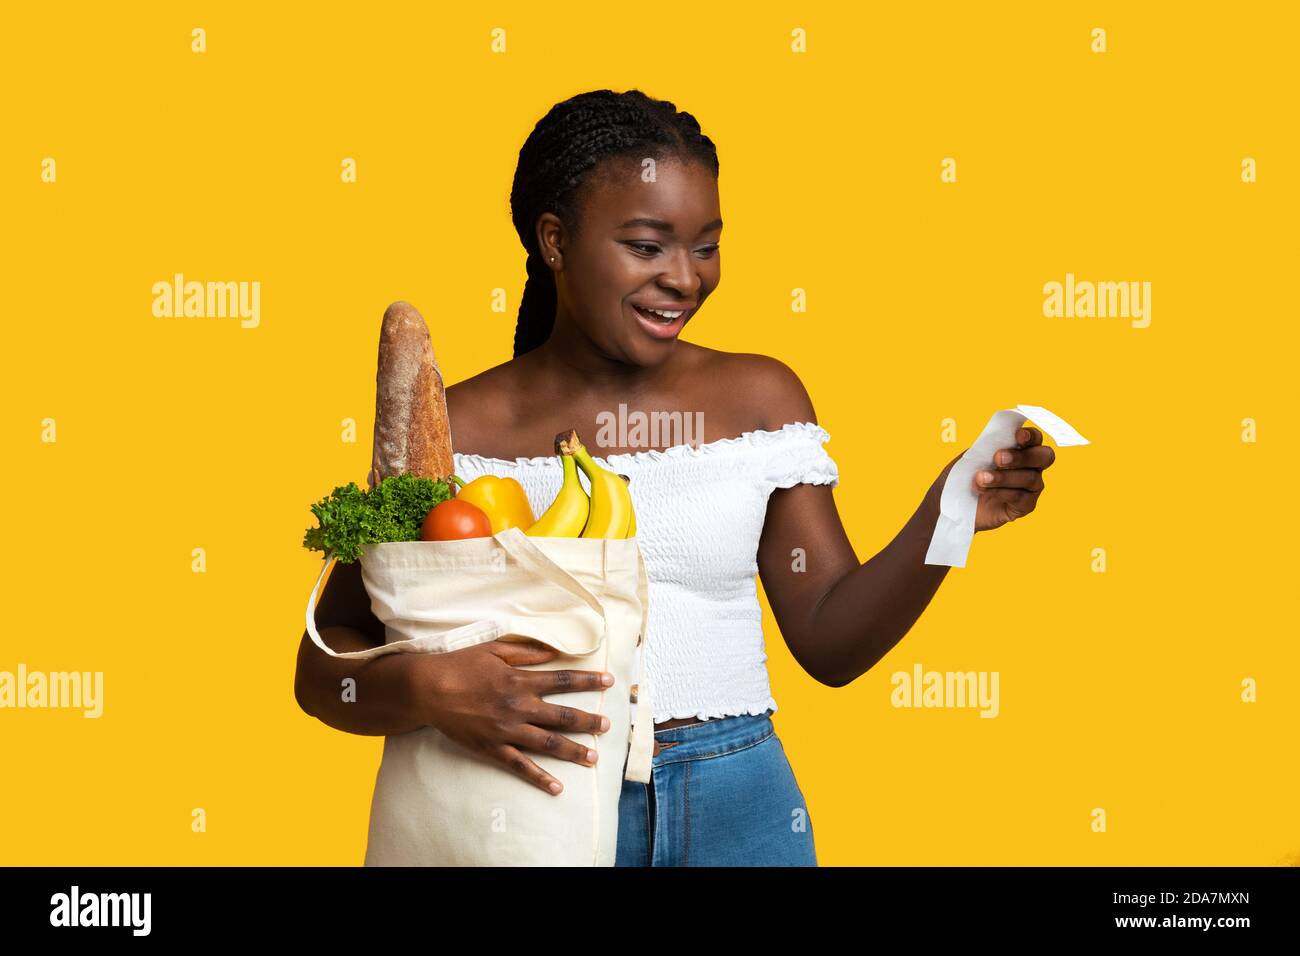 Shopping Economy. Happy Black Woman Holding Bag Of Groceries And Checking Receipt Stock Photo